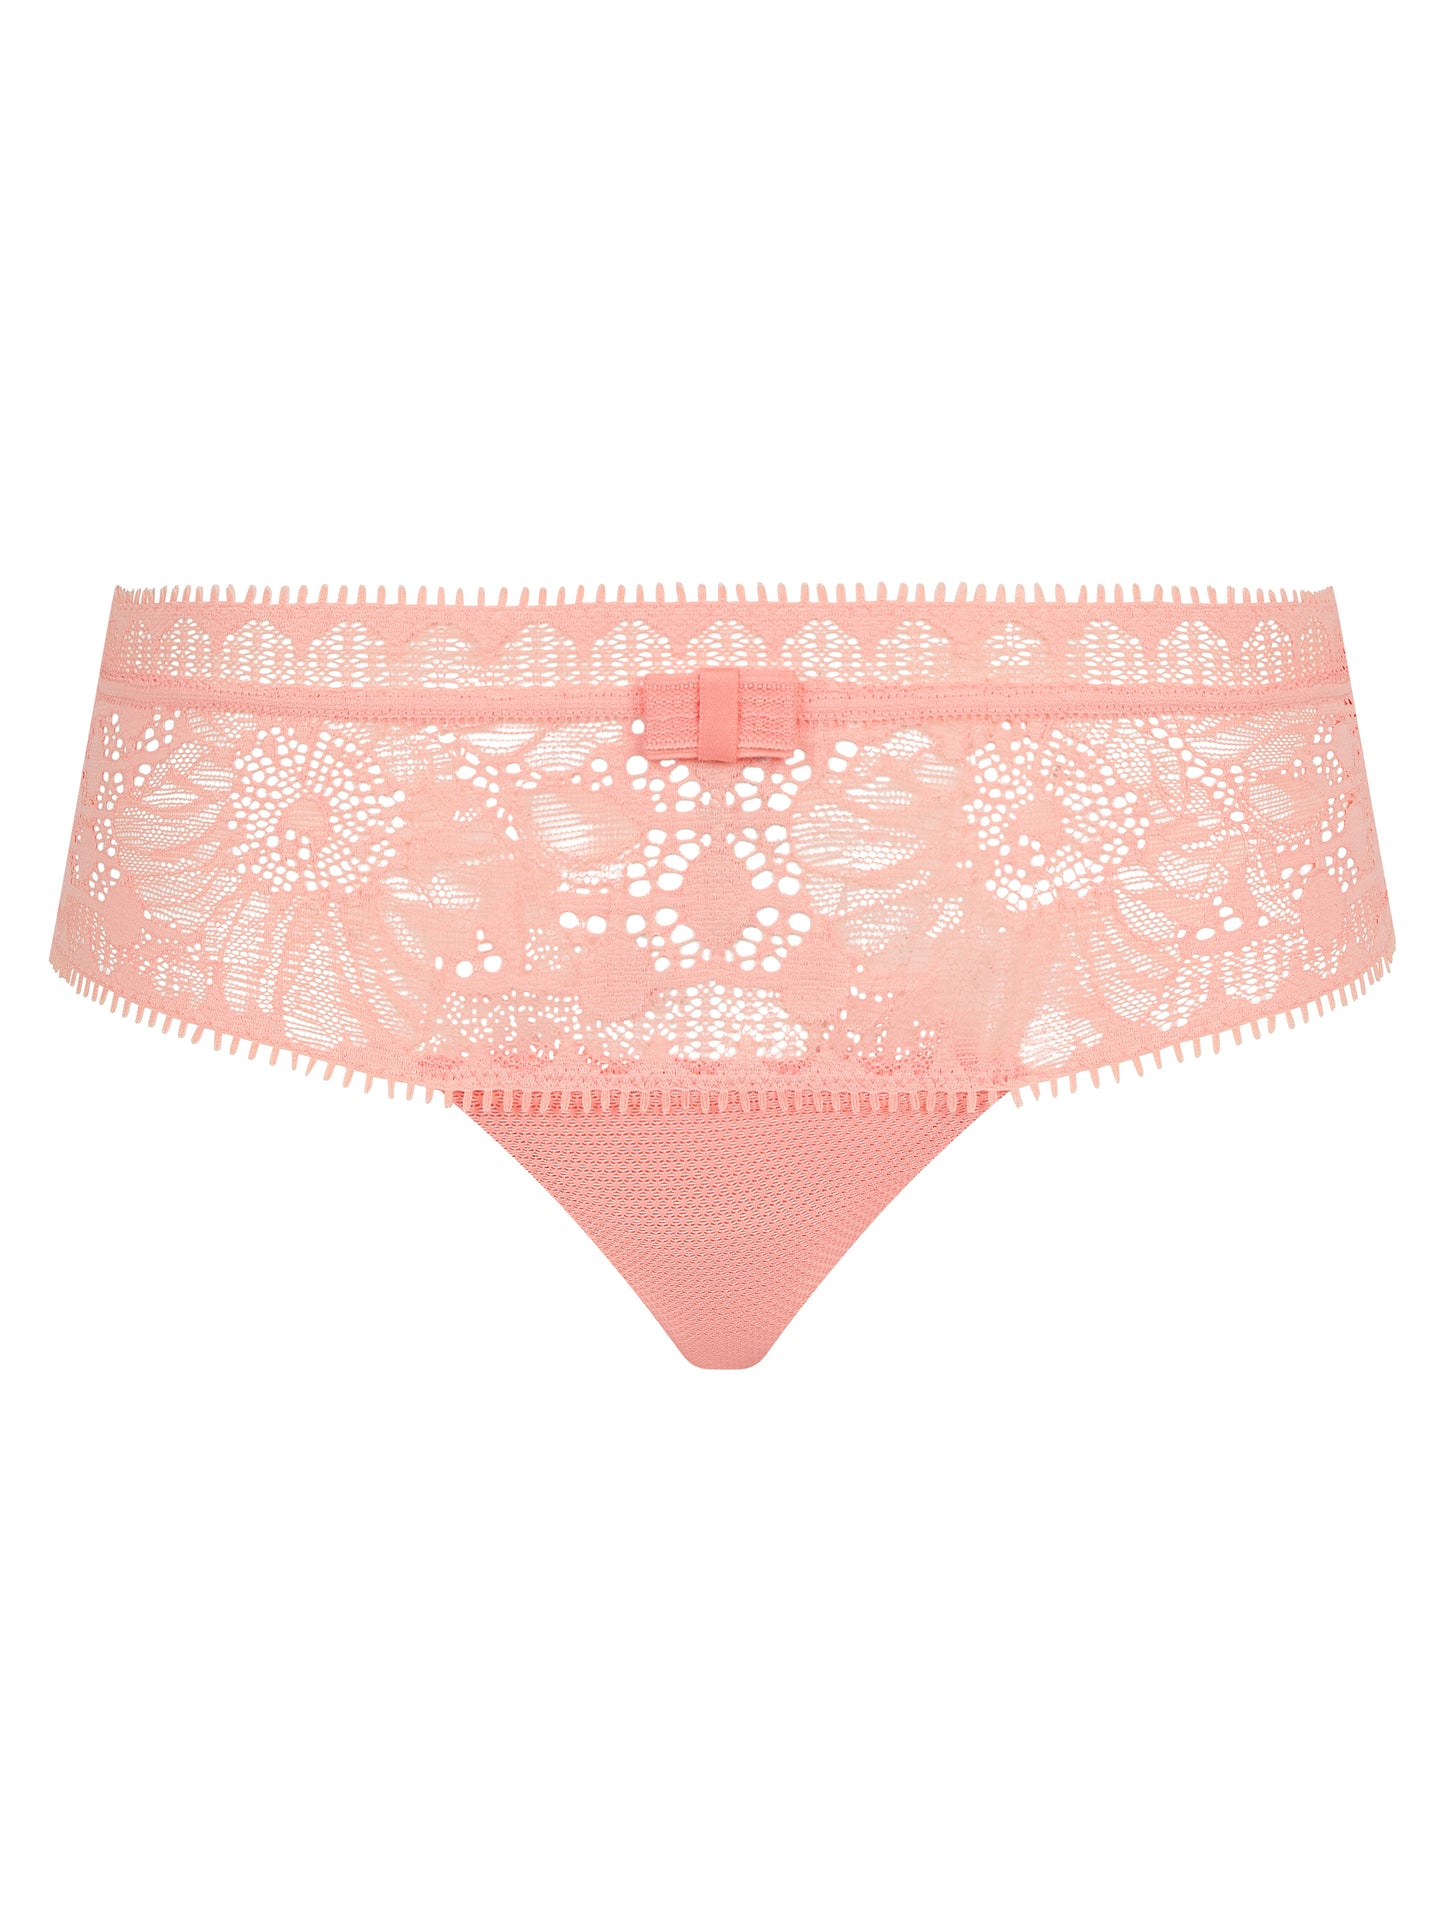 Chantelle shorty met kant - Day to night C15F40 - 06V-Candlelight peach